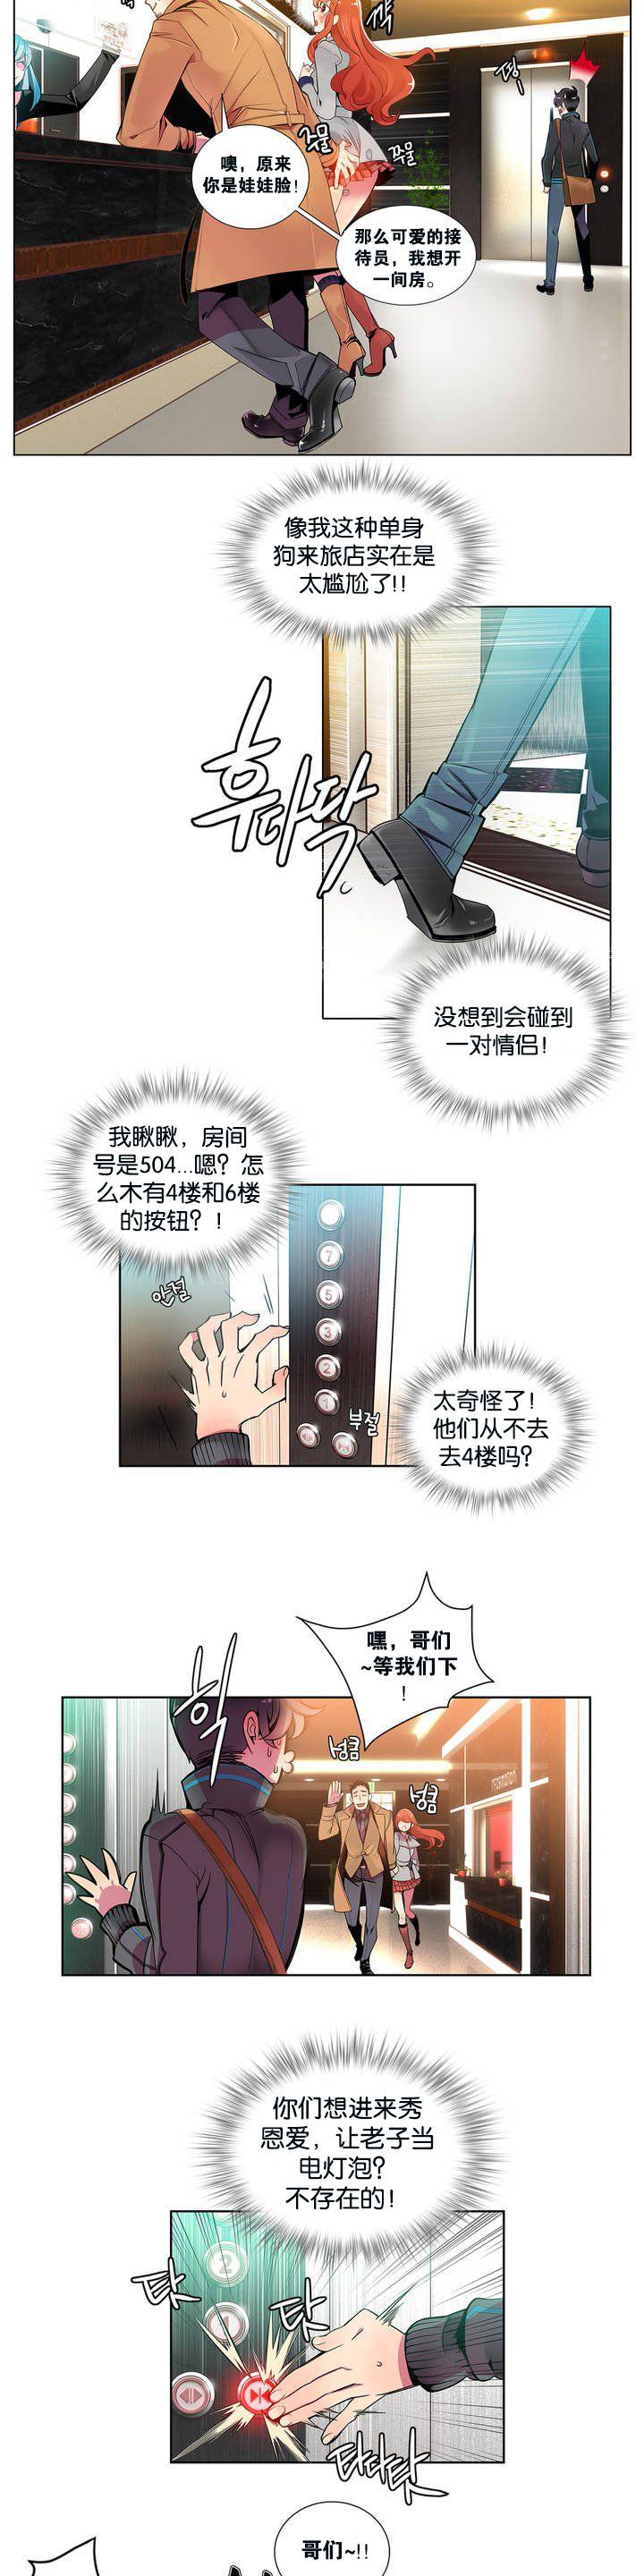 Family Taboo [Juder] 莉莉丝的纽带(Lilith`s Cord) Ch.1-15 [Chinese] Nena - Page 8